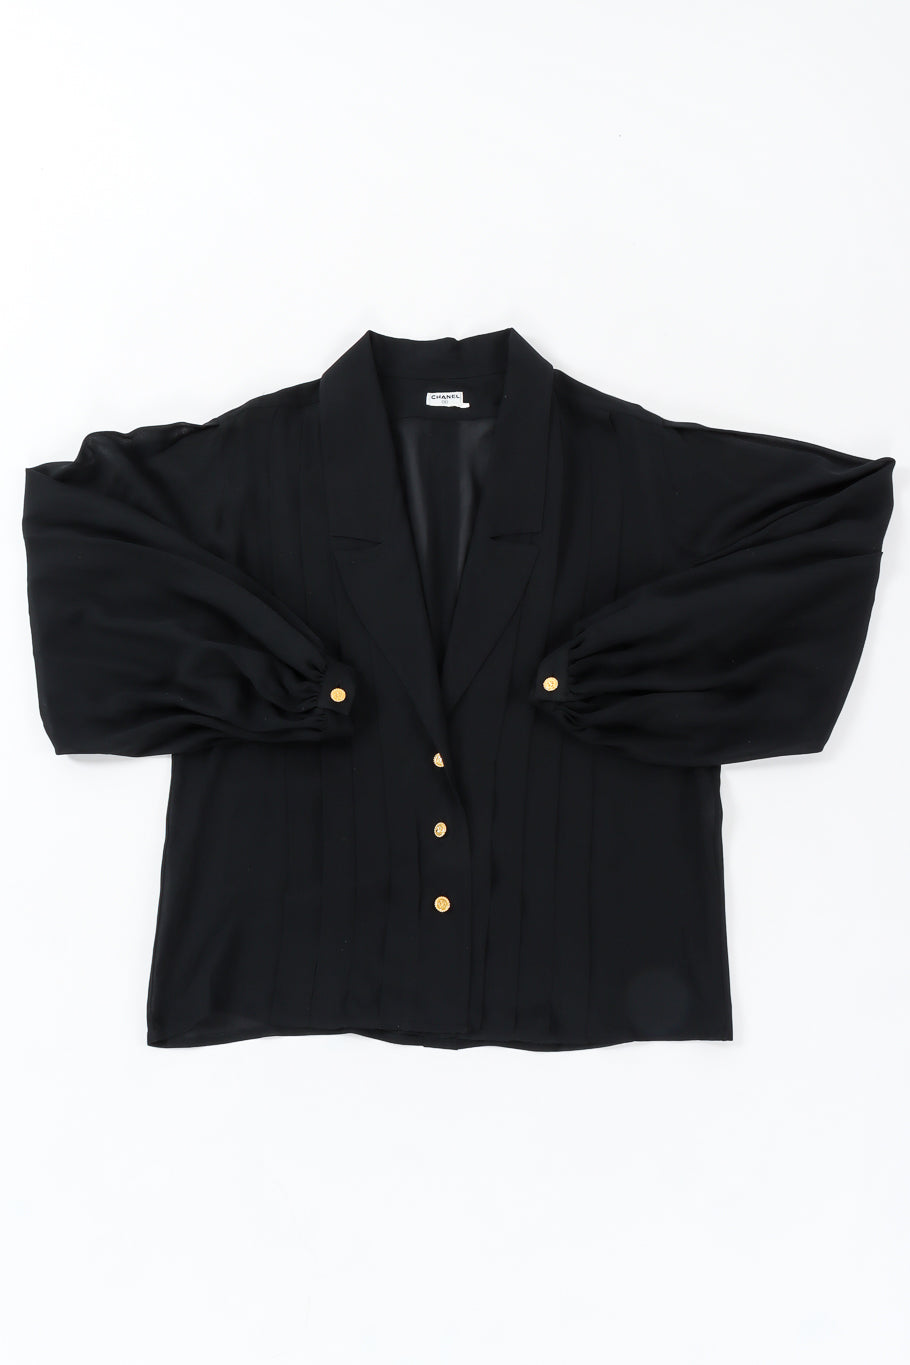 Vintage Chanel Pleated Sheer Silk Blouse front flat lay @ Recess LA